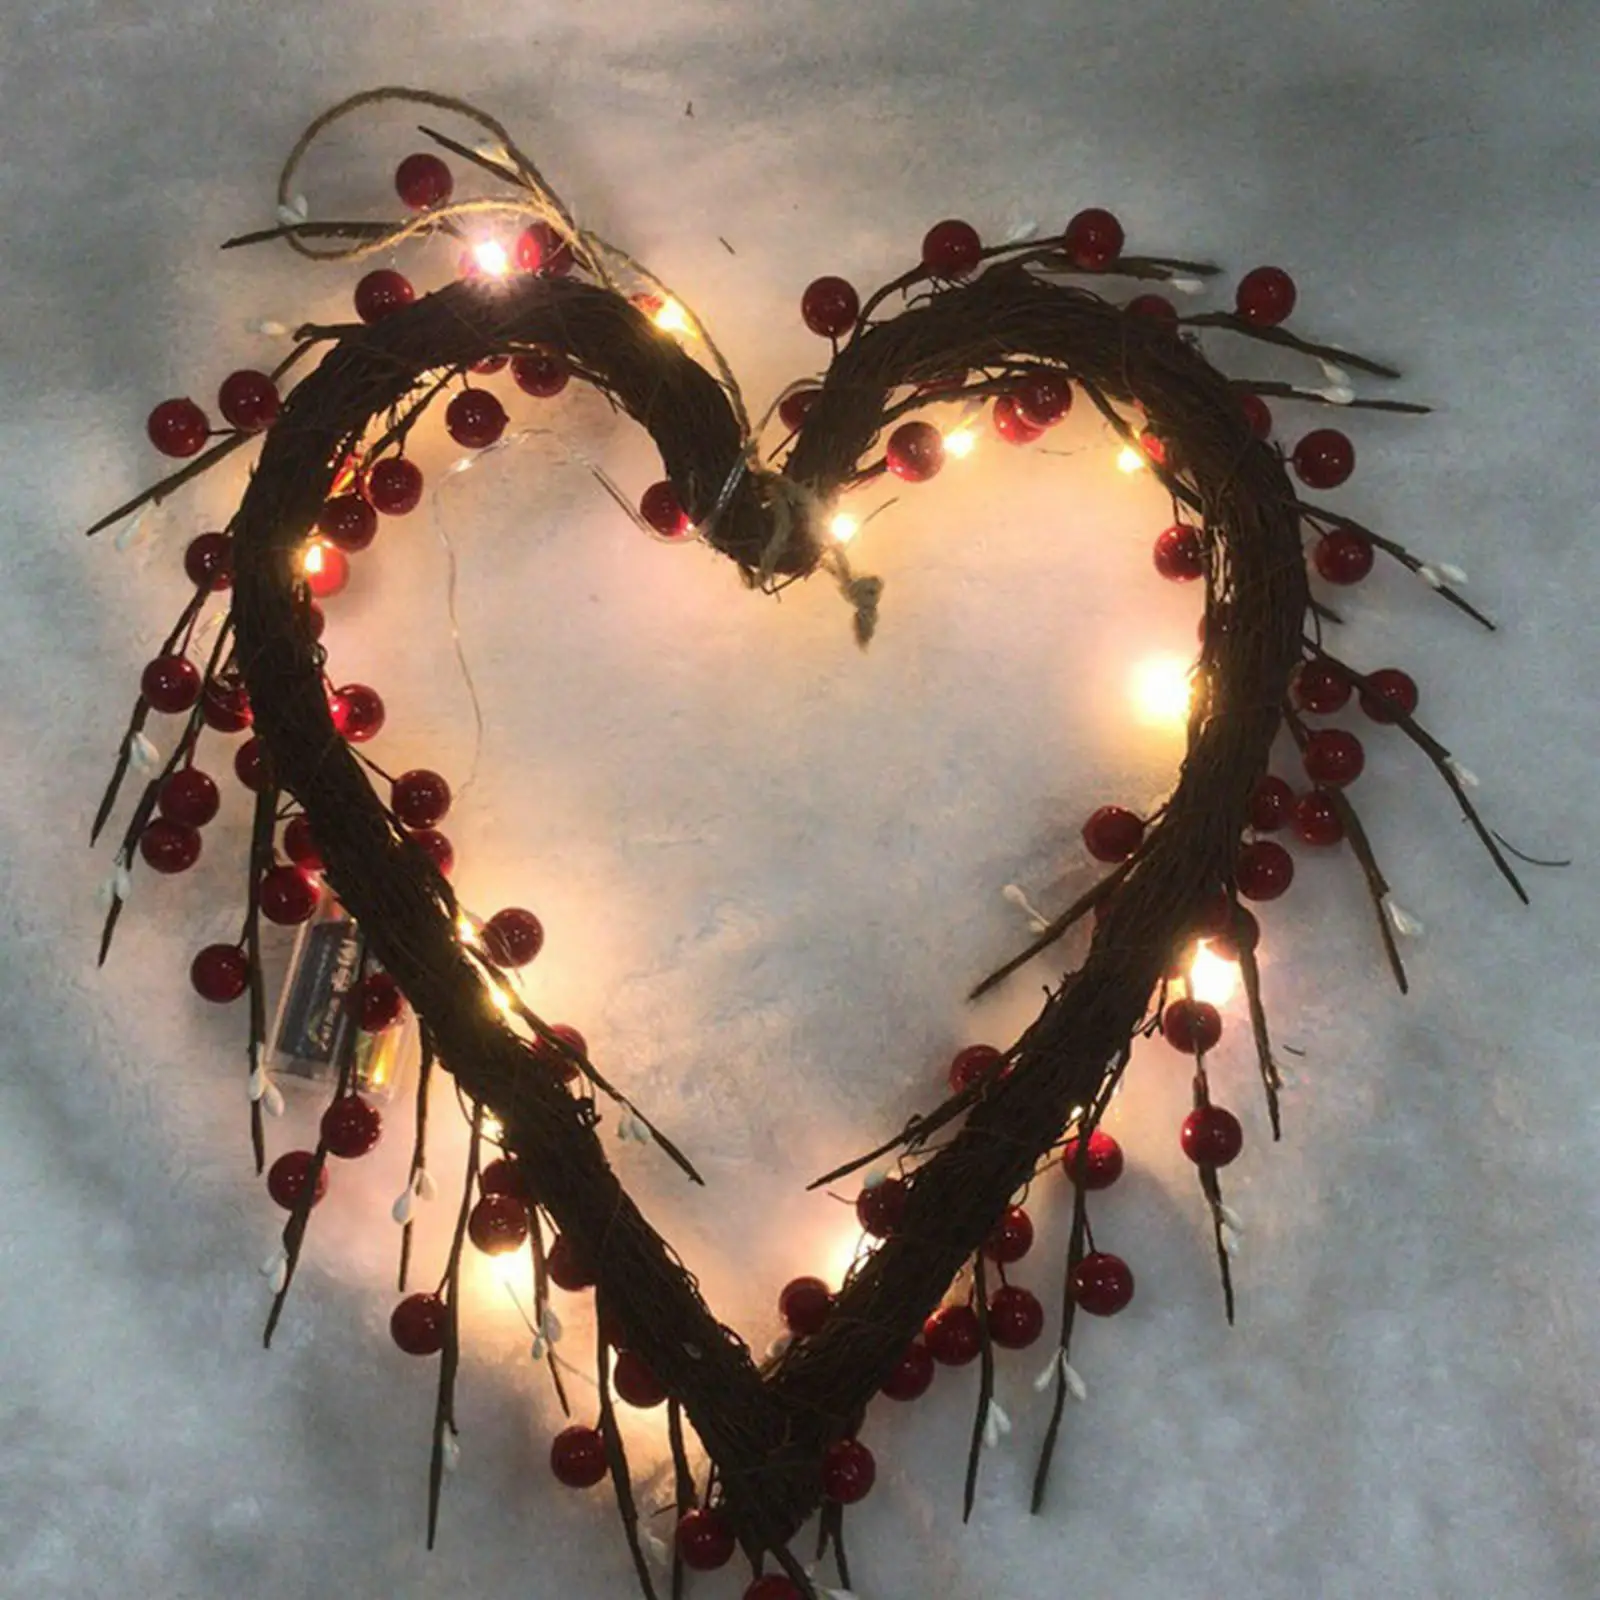 Heart Shape stunning Red Wreath, Lighted Clusters Christmas Garland Day Wedding Decor Housewarming Gift